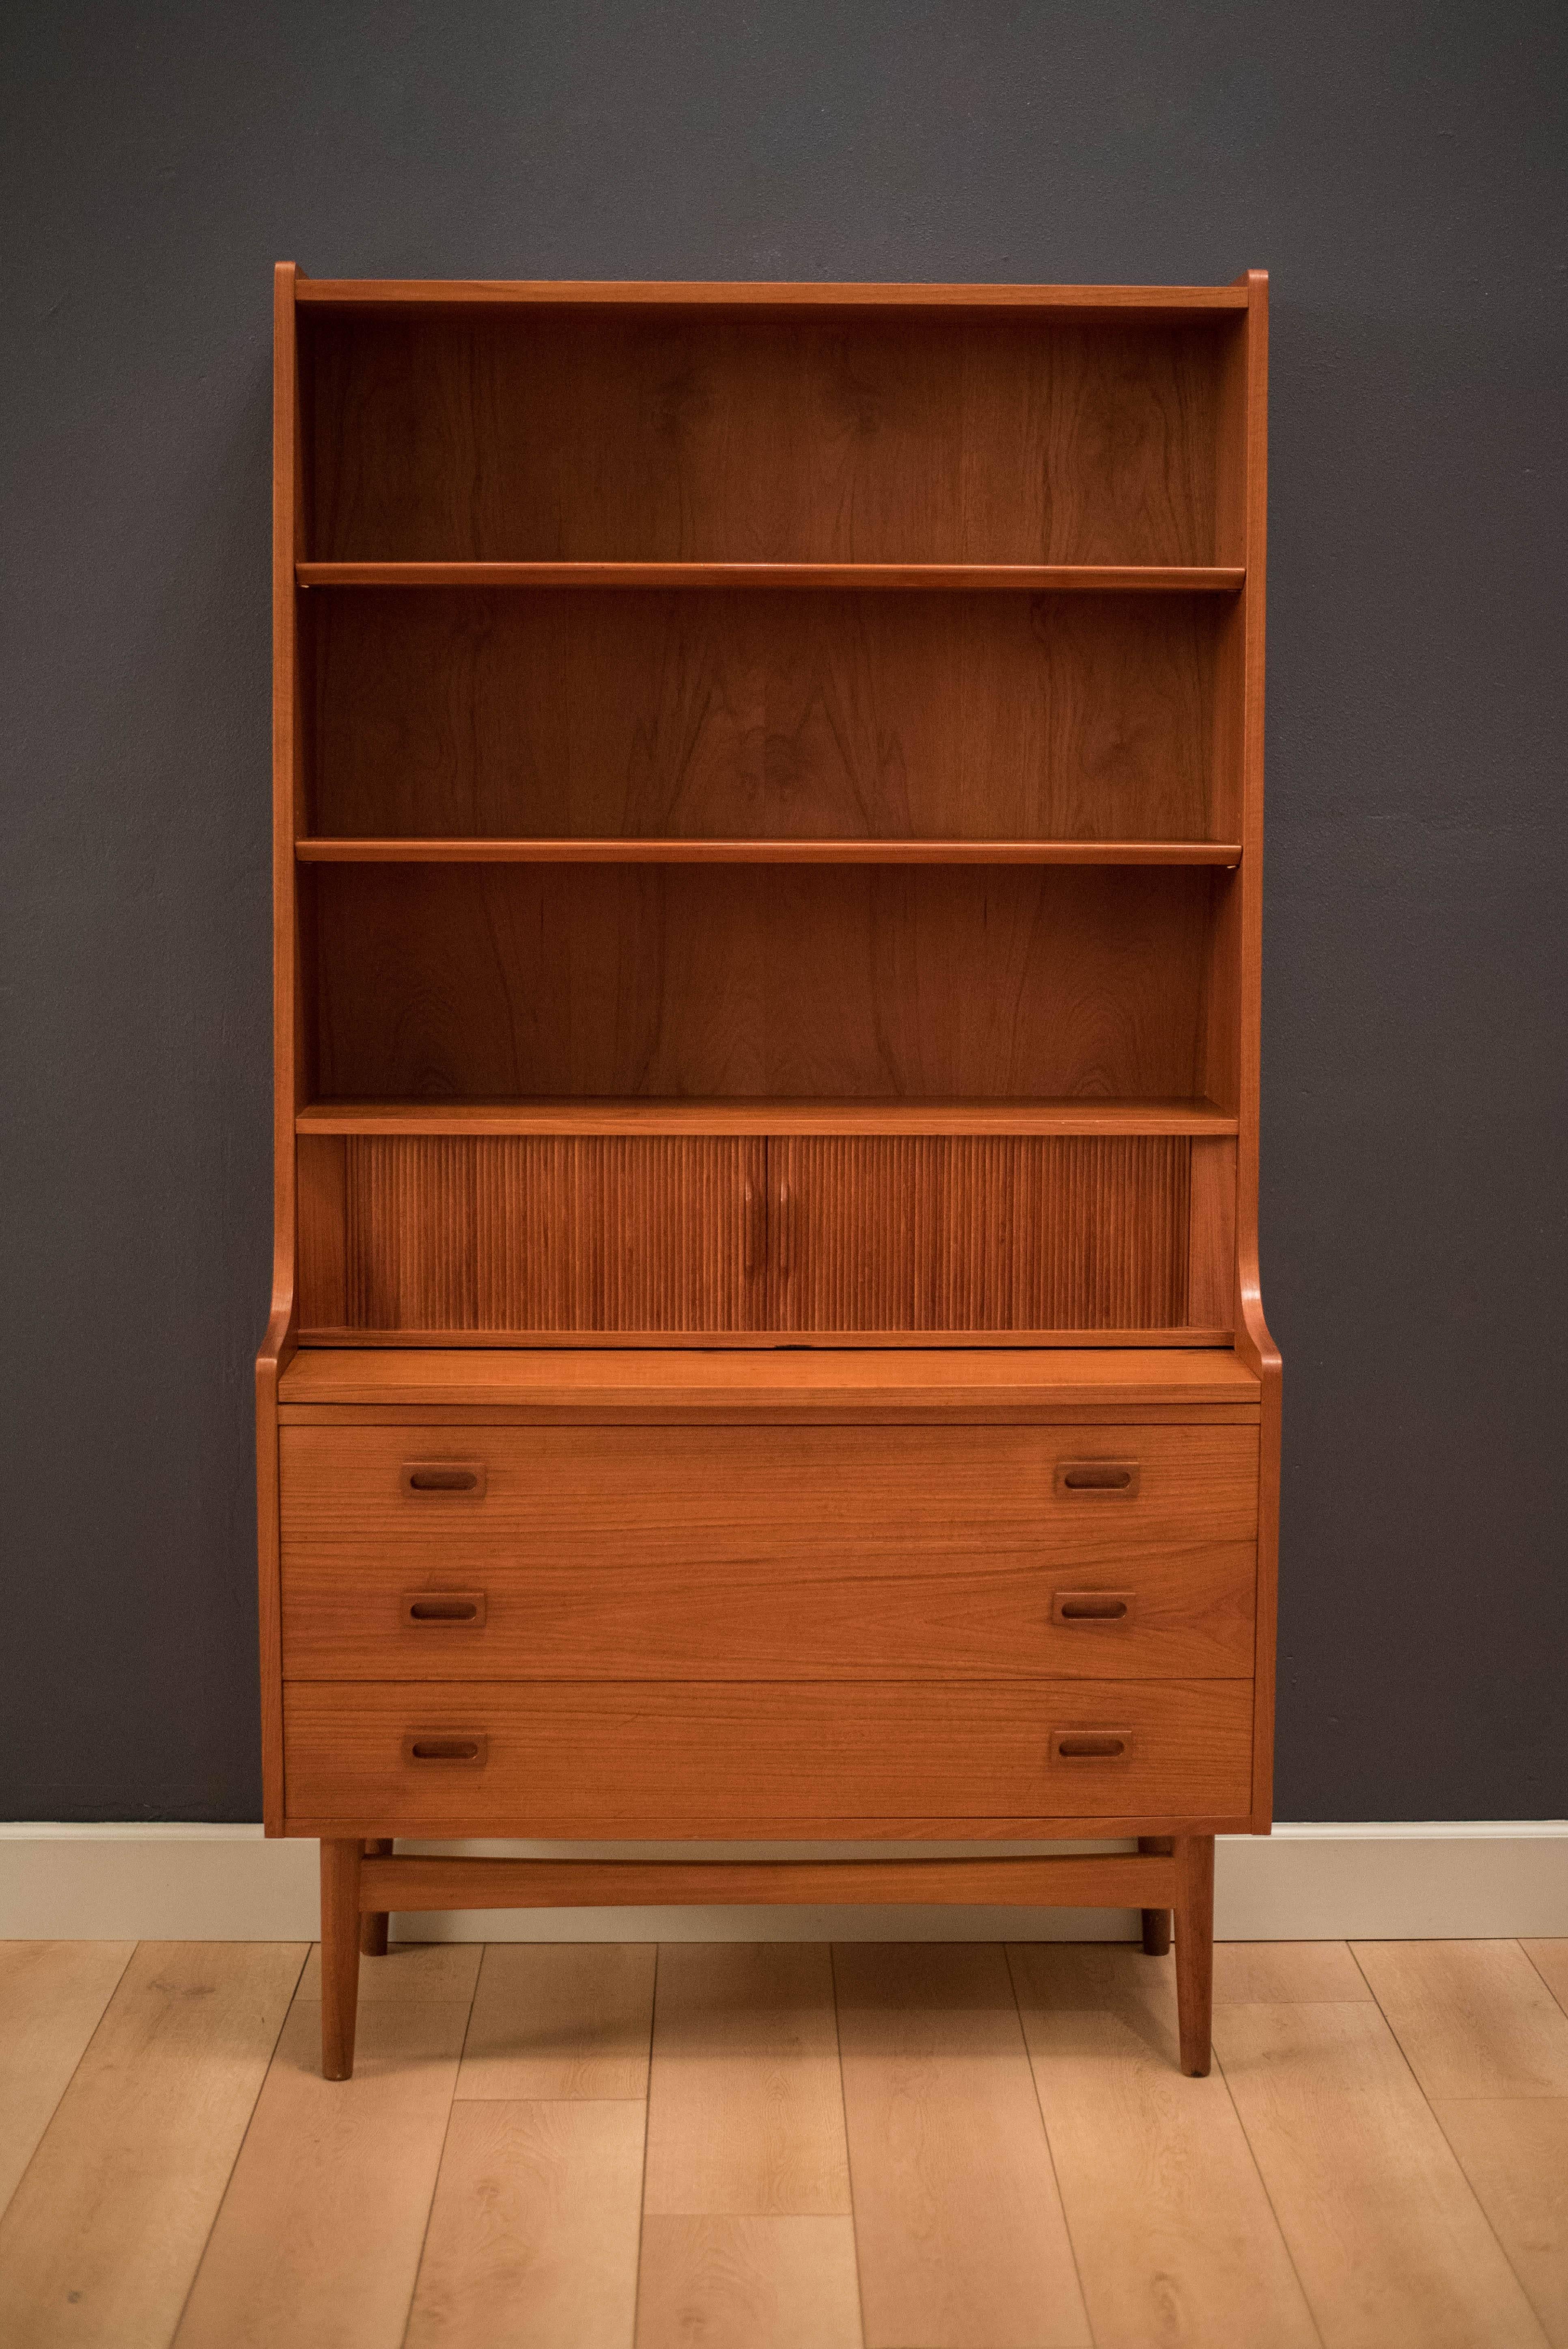 Mid-Century bookshelf secretary desk designed by Børge Mogensen in teak. This versatile piece has three storage drawers and a unique tambour door that reveals smaller storage compartments. Desk slides in/out to maximize space. 

Desk slides out